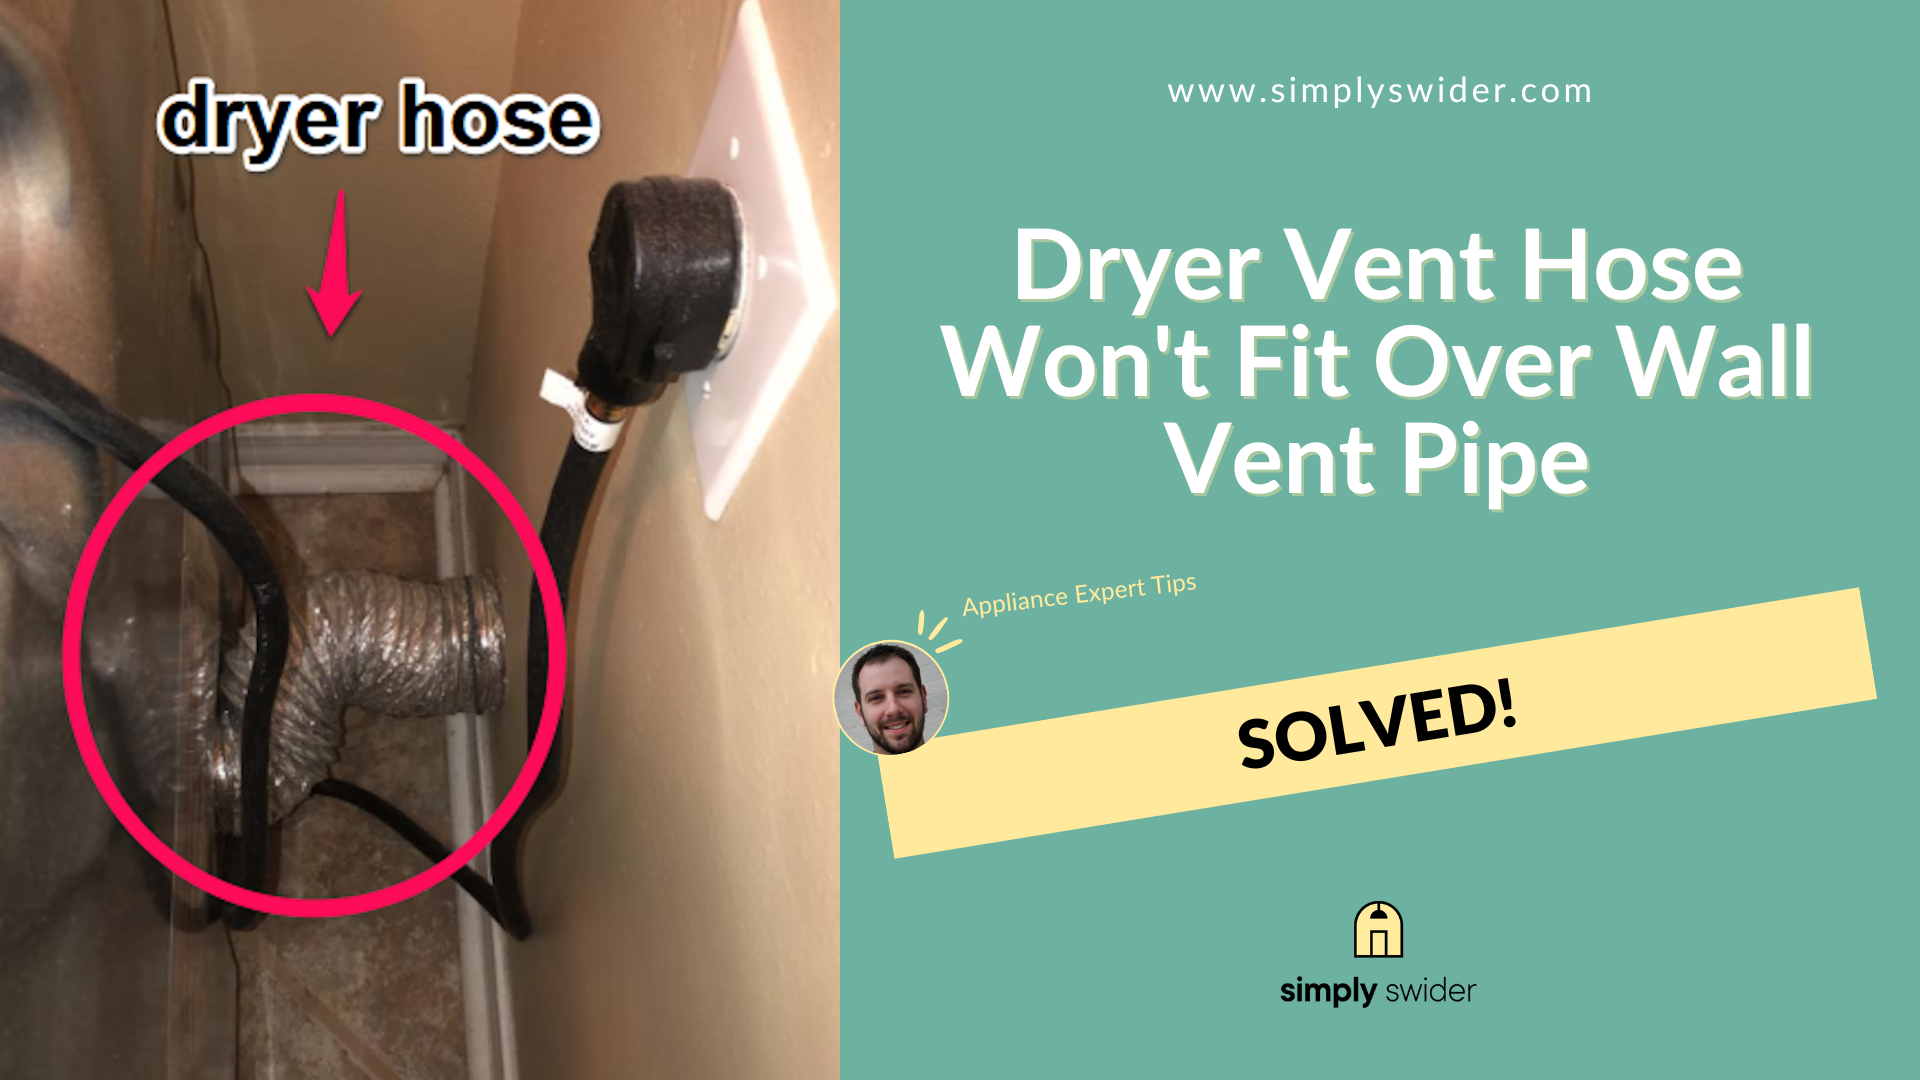 Dryer Vent Hose Won't Fit Over Wall Vent Pipe